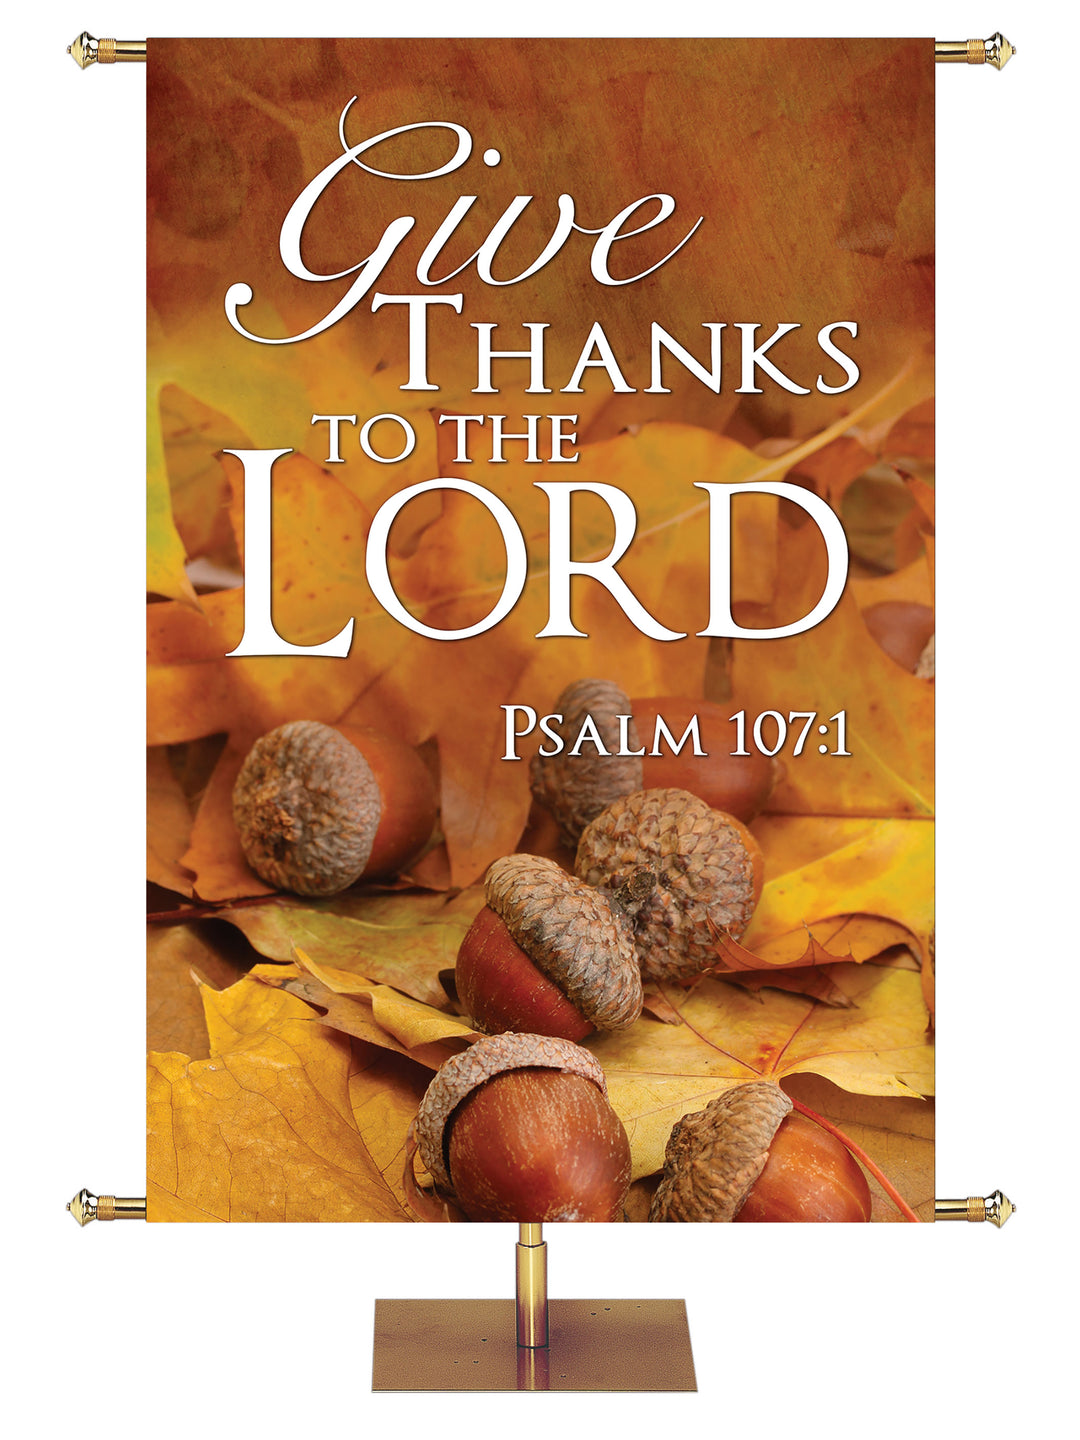 Give Thanks To The Lord Design 3 Psalm 107:1 Church Banner for Fall and Thanksgiving with acorns and fall leaves